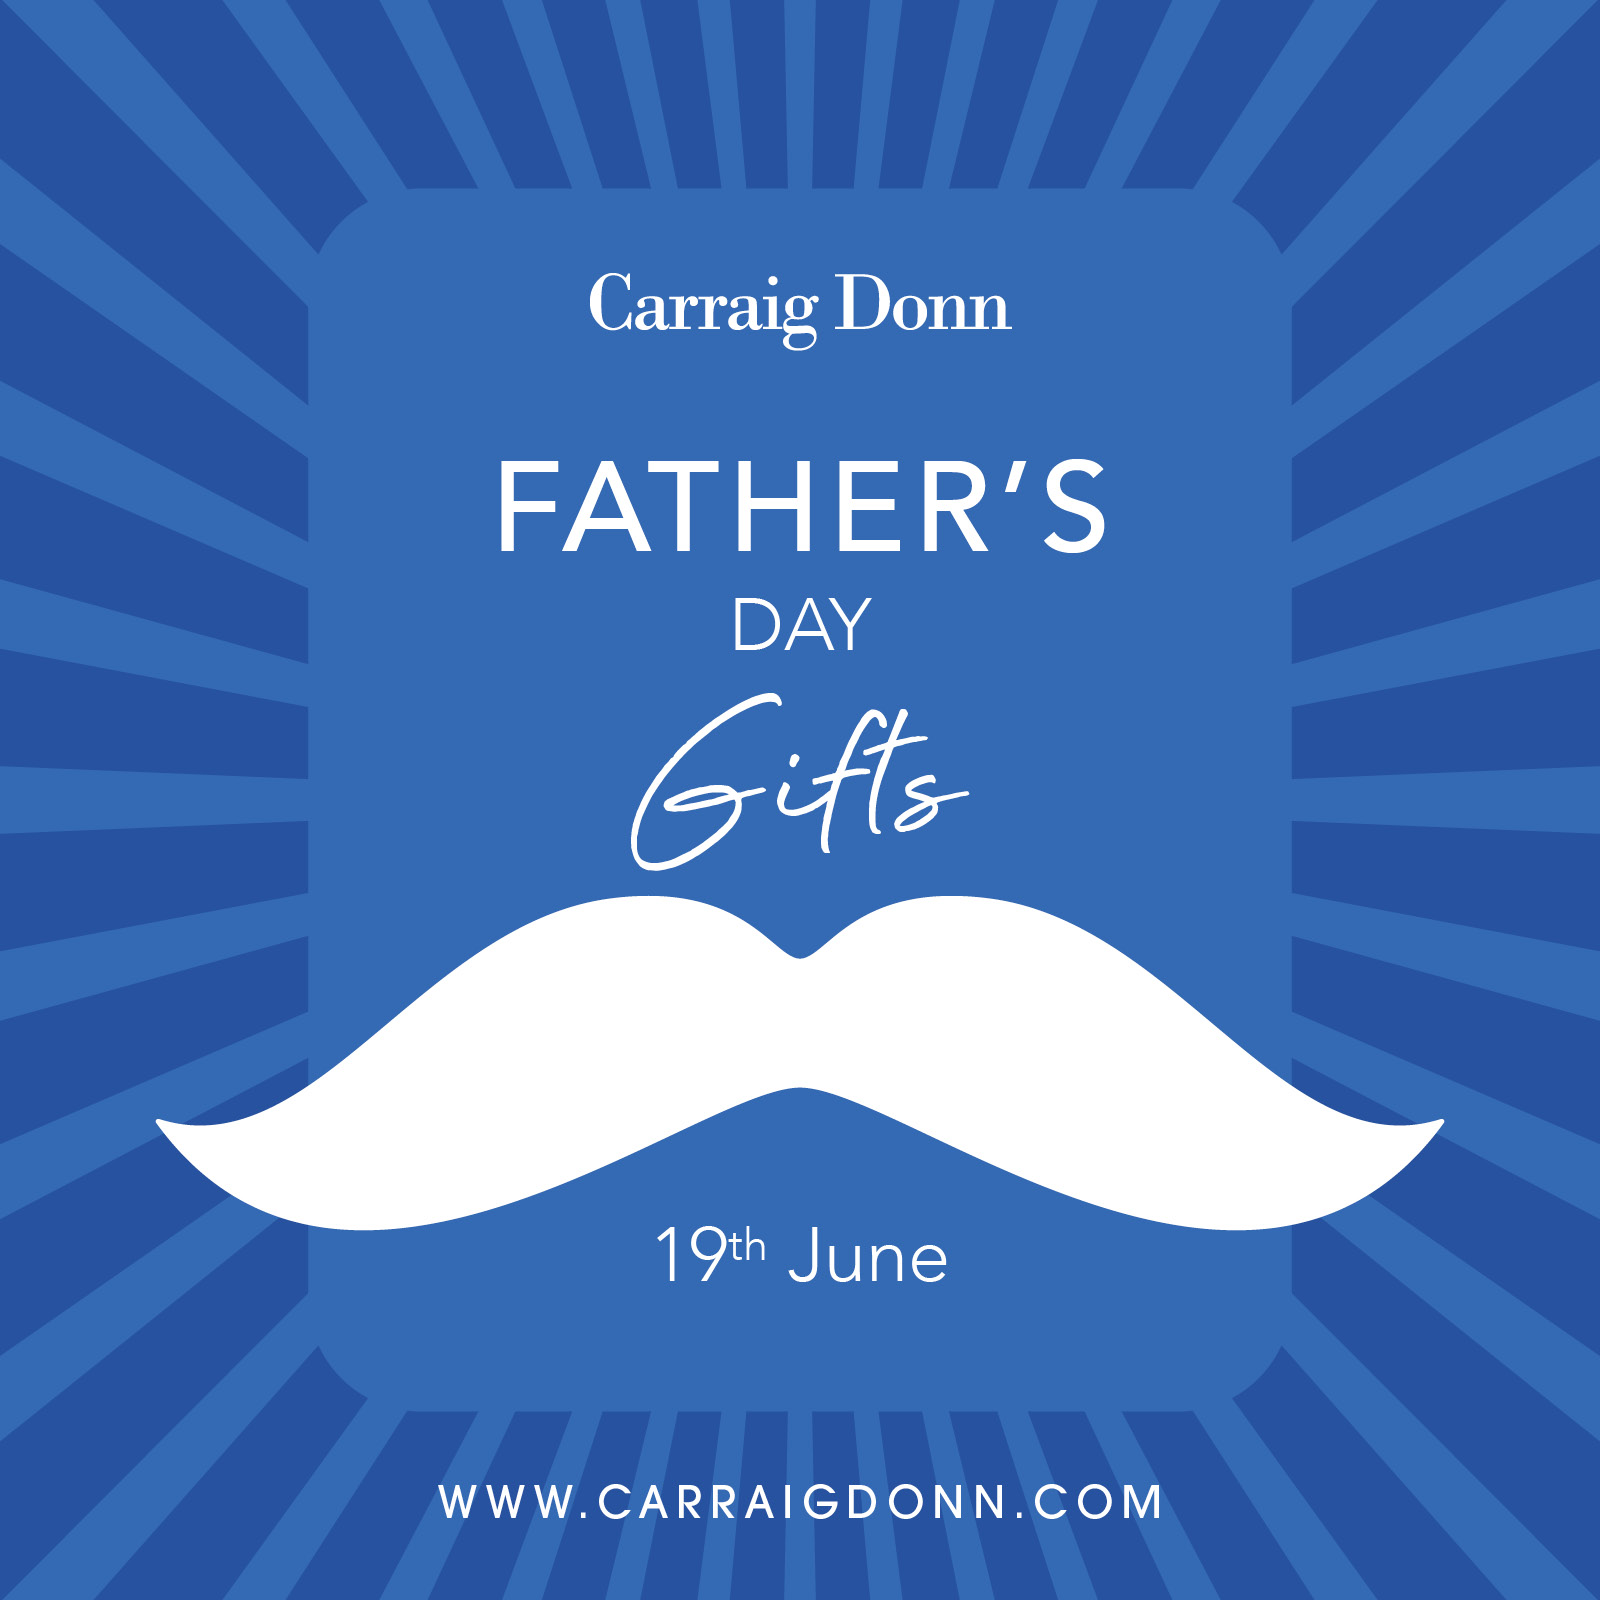 This Father’s Day, treat DAD to a thoughtful gift from Carraig Donn!